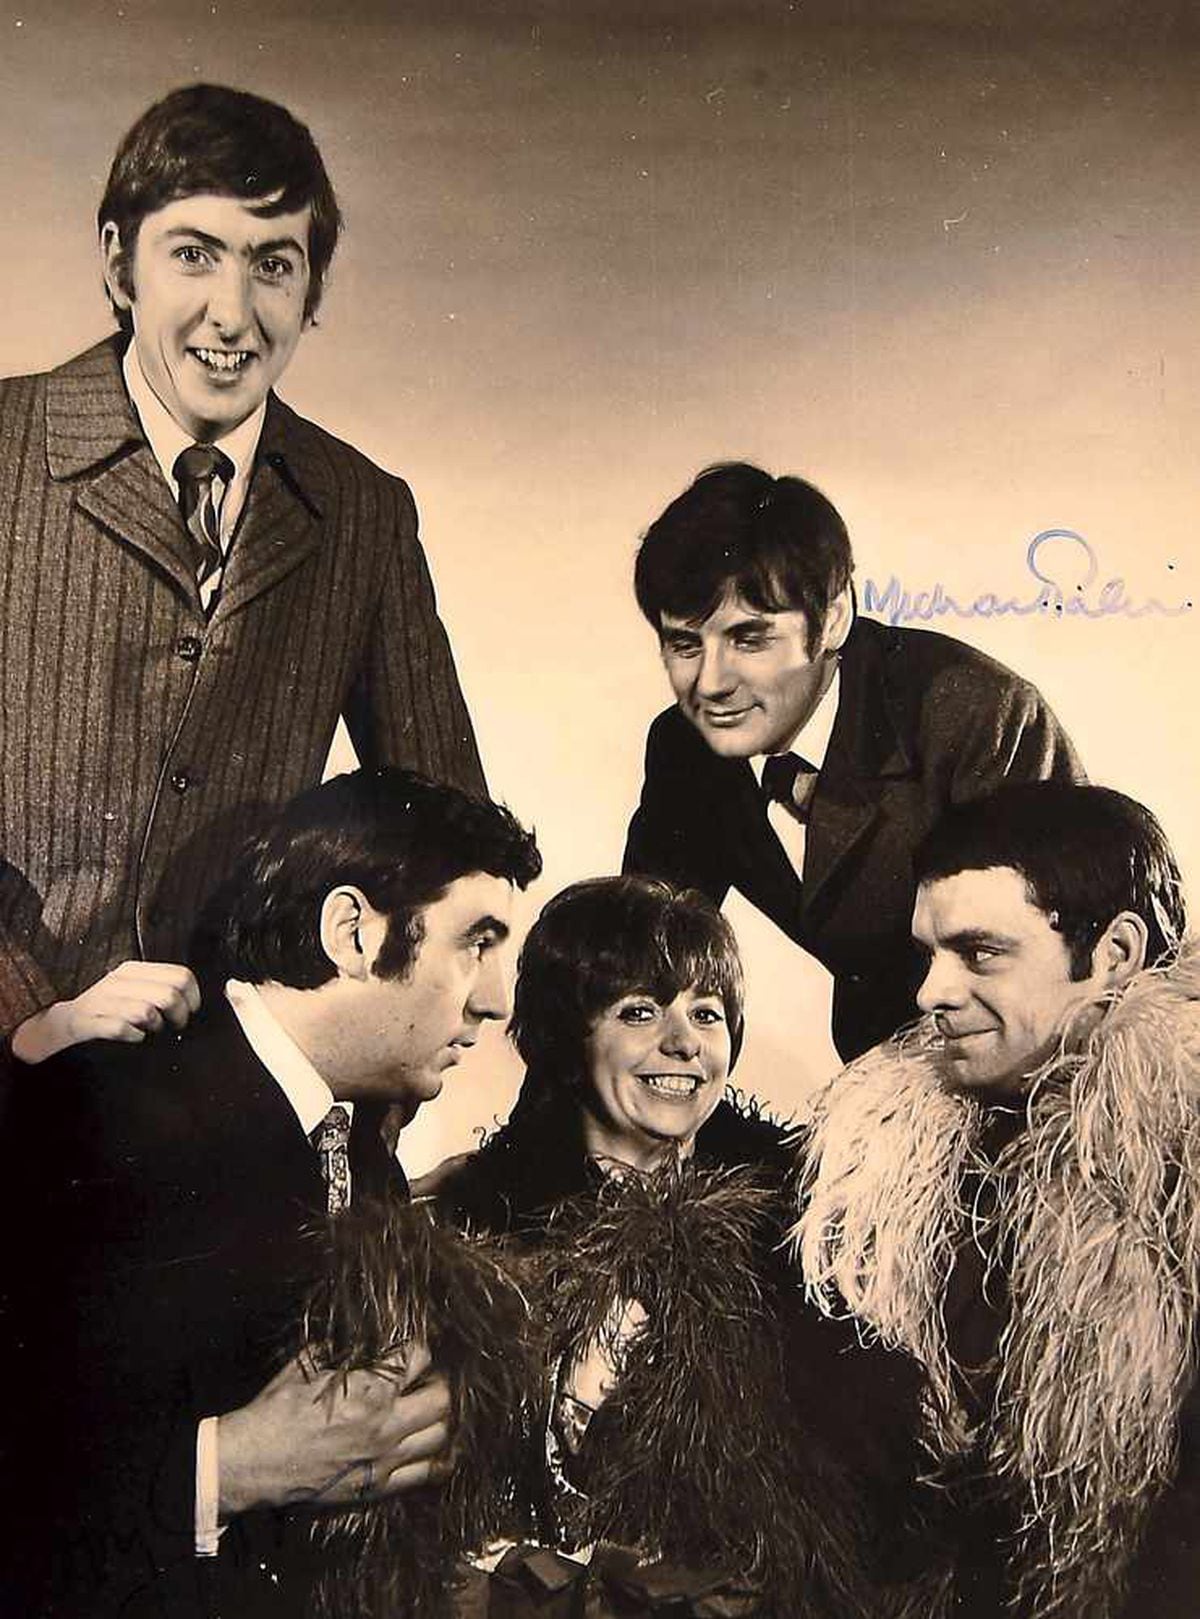 Eric with Michael Palin, top right, and Terry Jones, bottom left